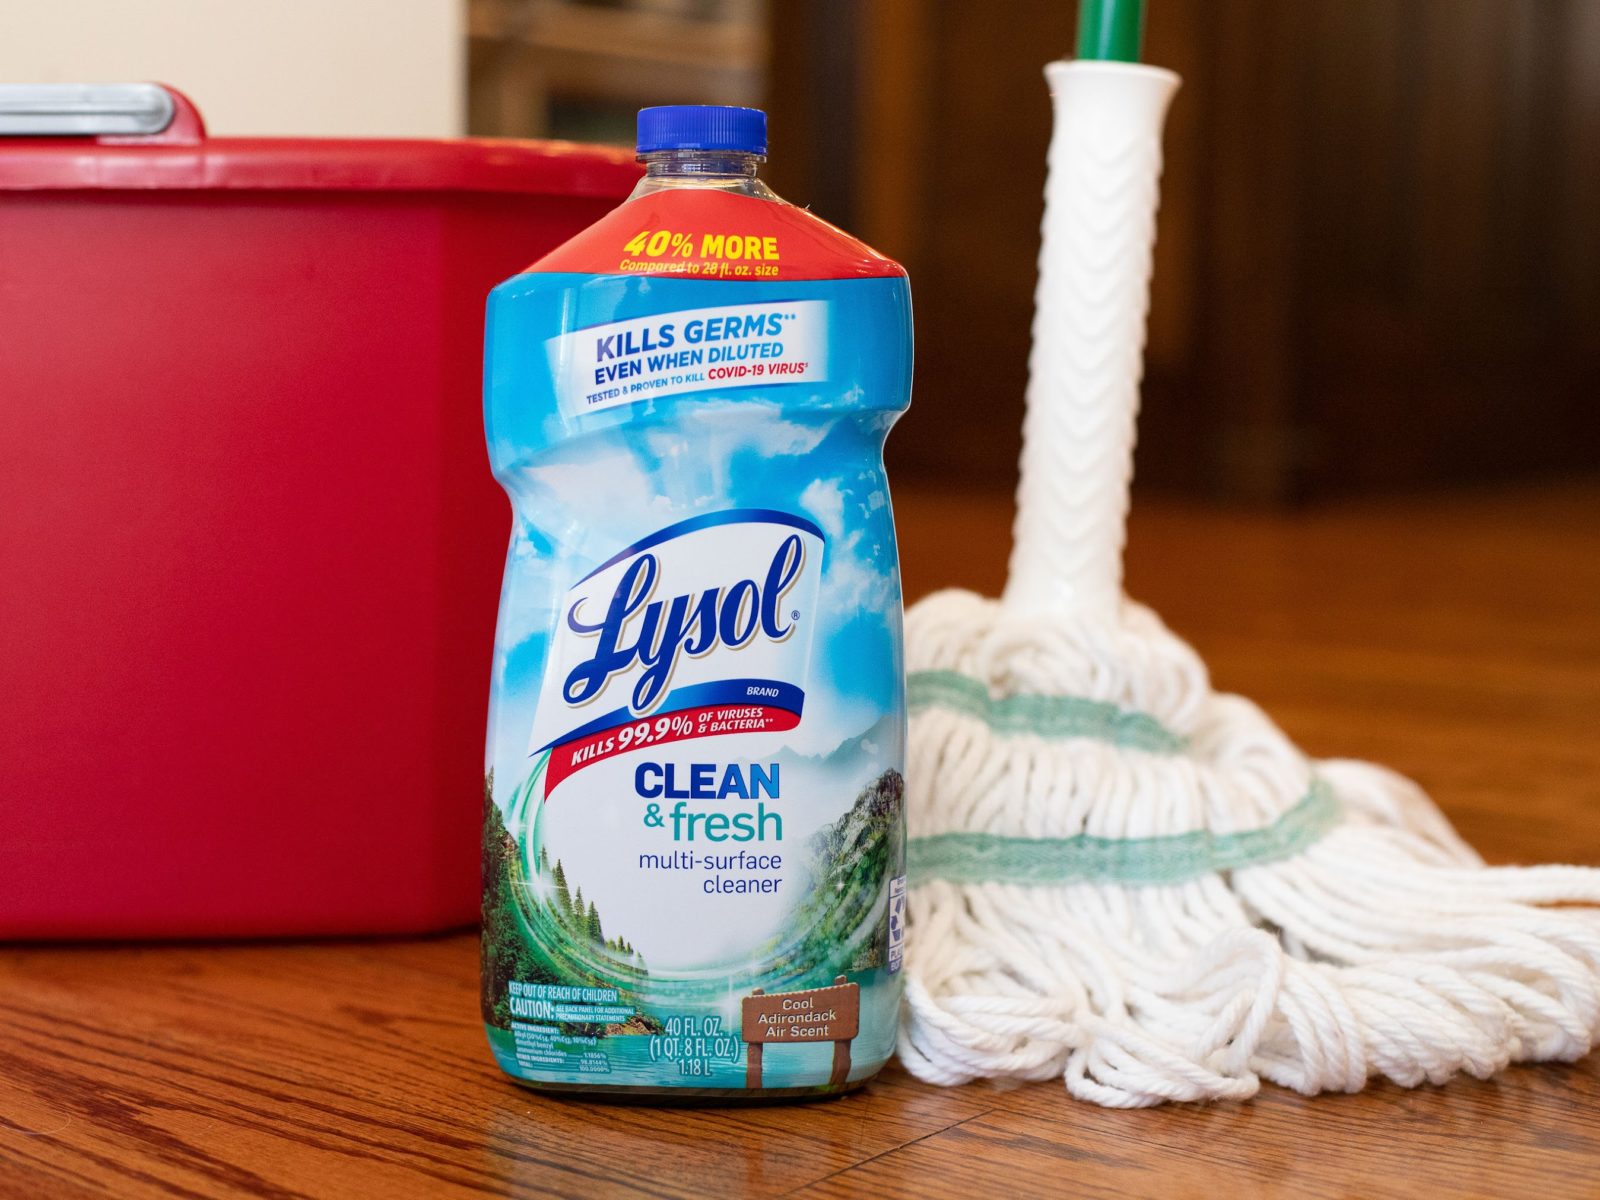 Lysol Disinfecting Wipes Or Multi-Purpose Cleaner As Low As $2.50 At Publix on I Heart Publix